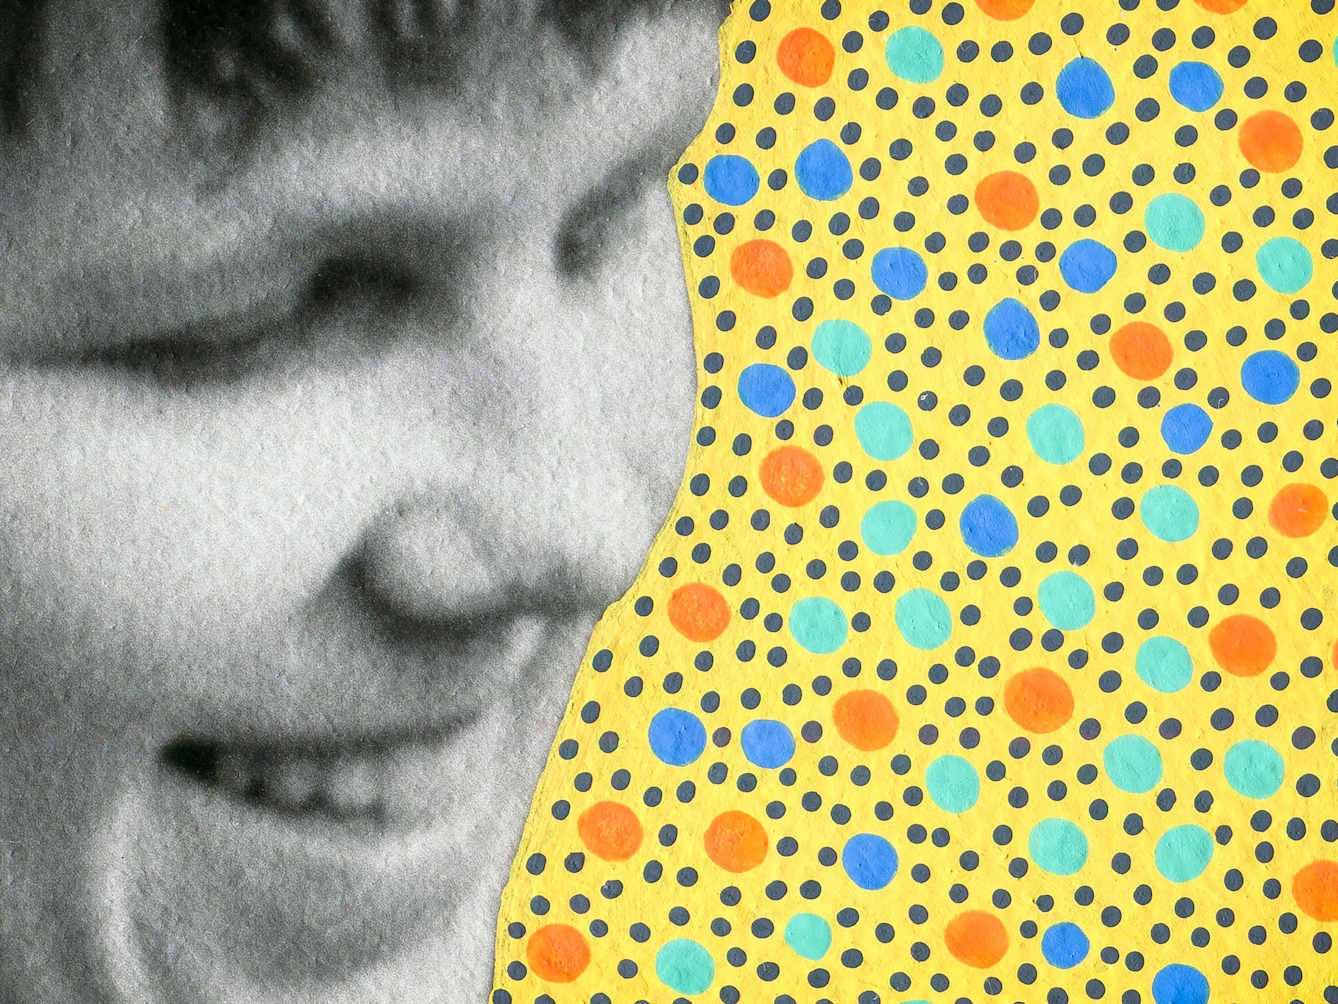 Artwork created by painting over the surface of a black and white photographic print with colourful paint. The artwork shows the original head of an adult woman cropped in close. Apart from the head the rest of the image is a painted yellow background covered in small green, orange and blue dots. The texture of the paint can be seen, including the boundary between the painted area and the original photographic print.